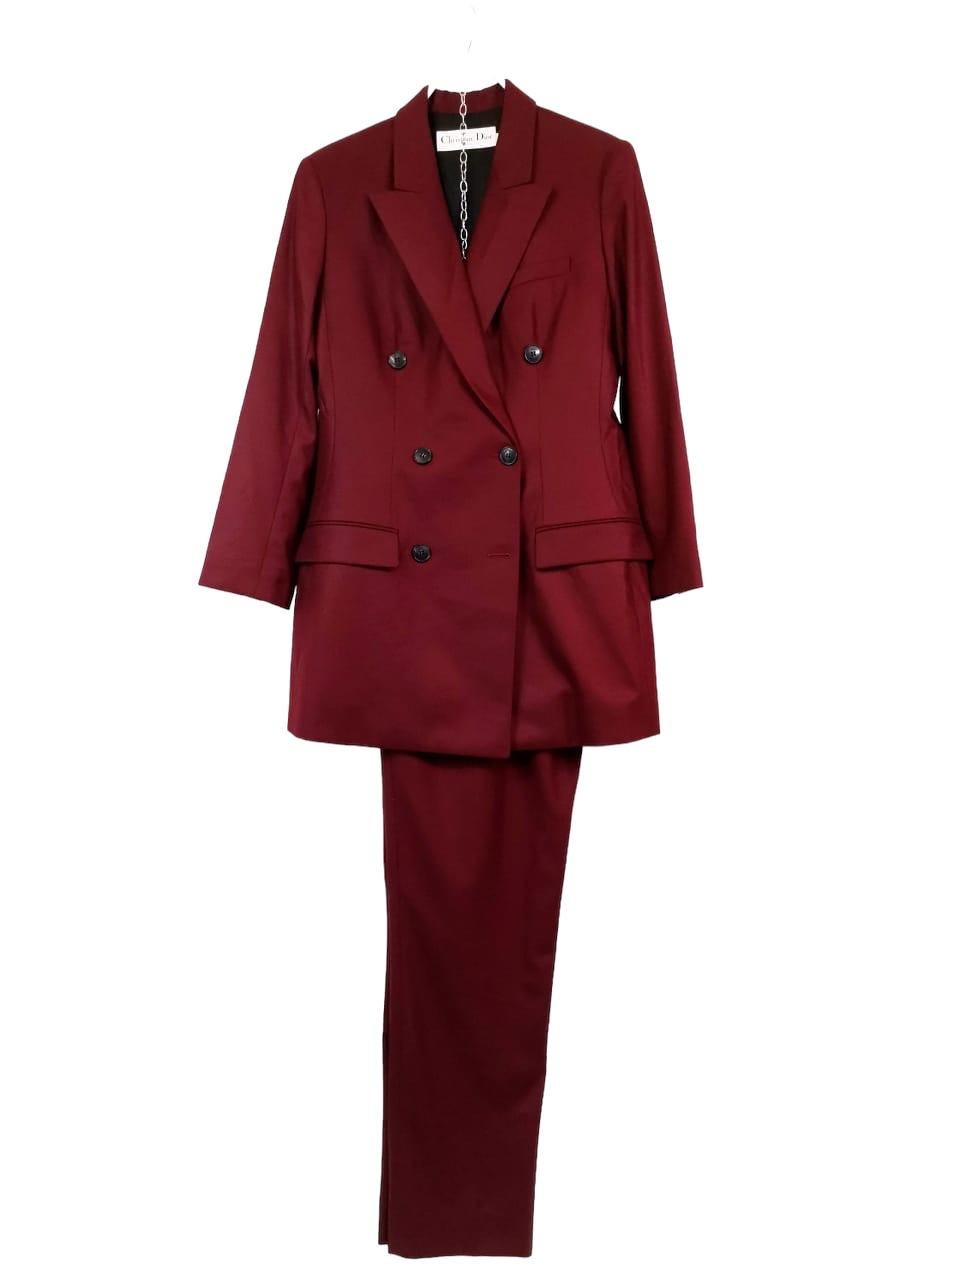 Red Christian Dior Jacket & Trousers Suit For Sale